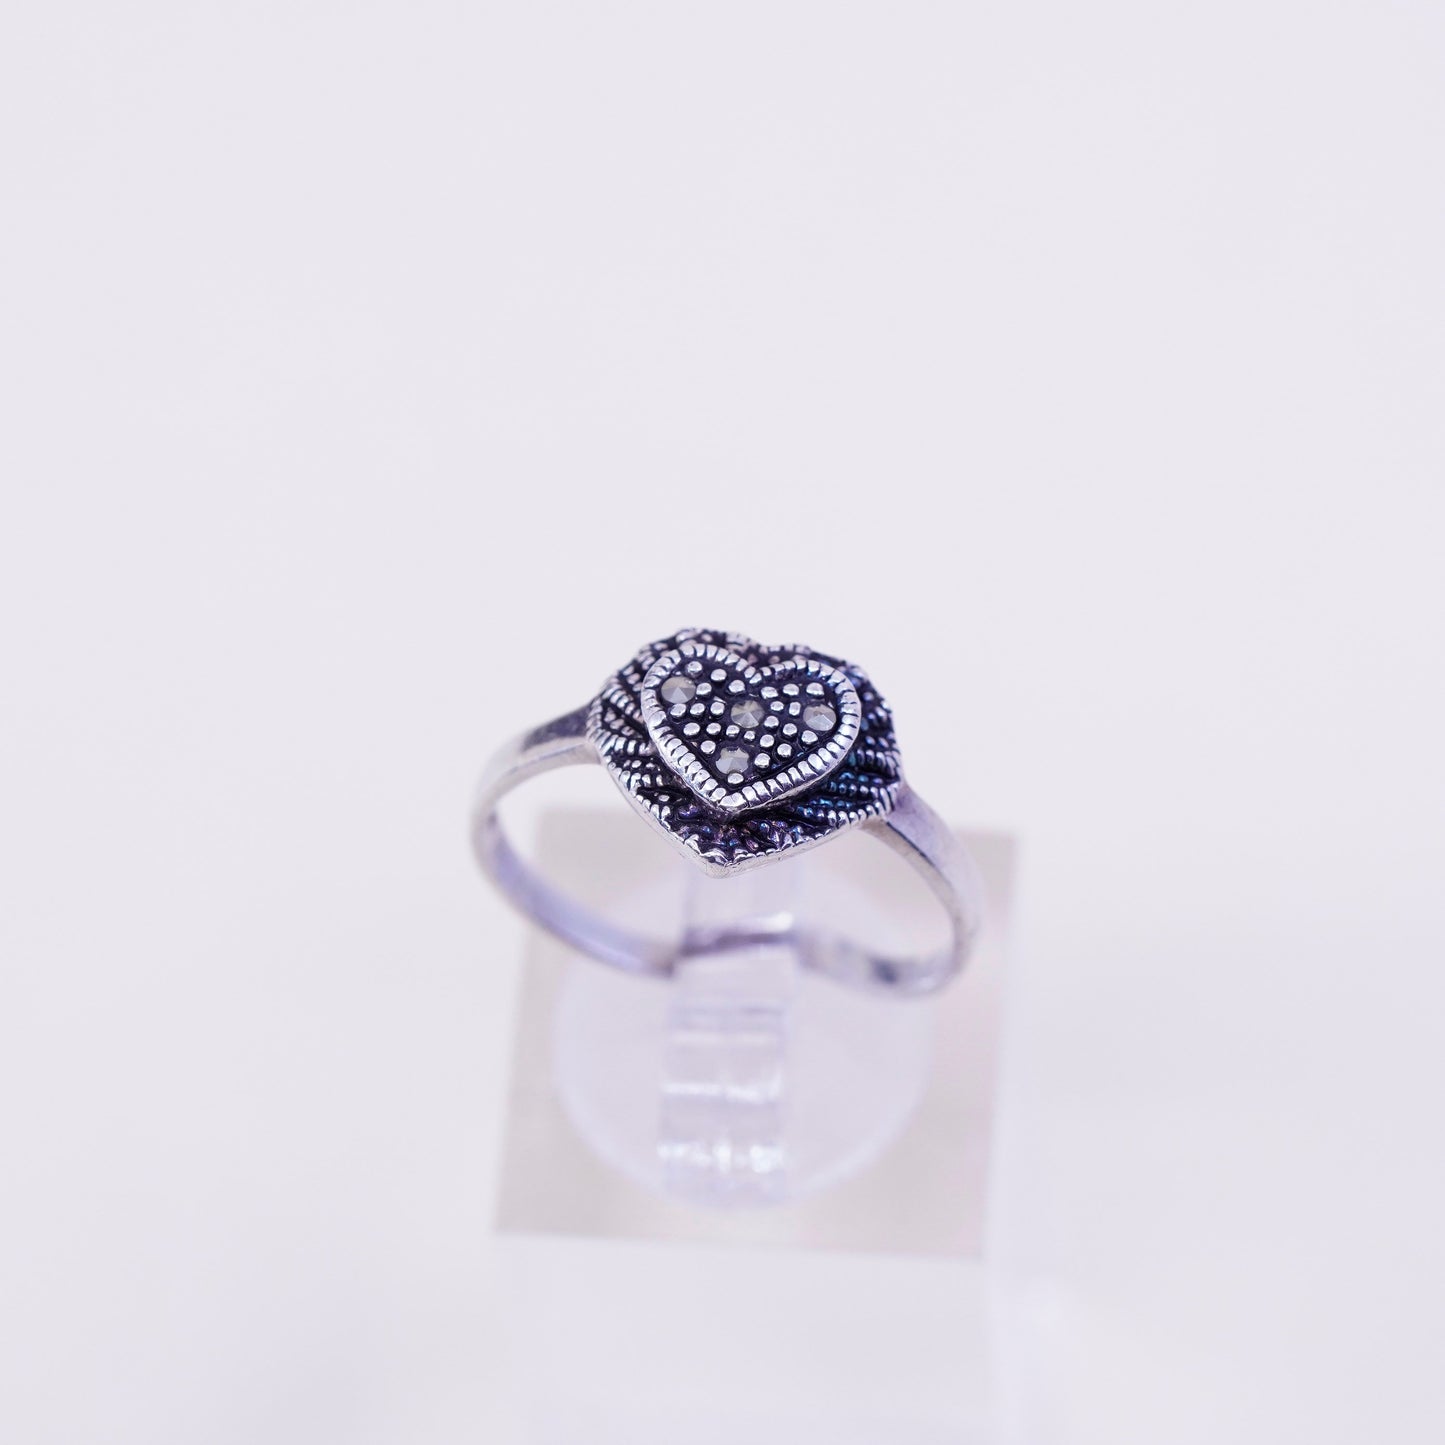 Size 8.5, vintage Sterling silver handmade ring, 925 heart with marcasite